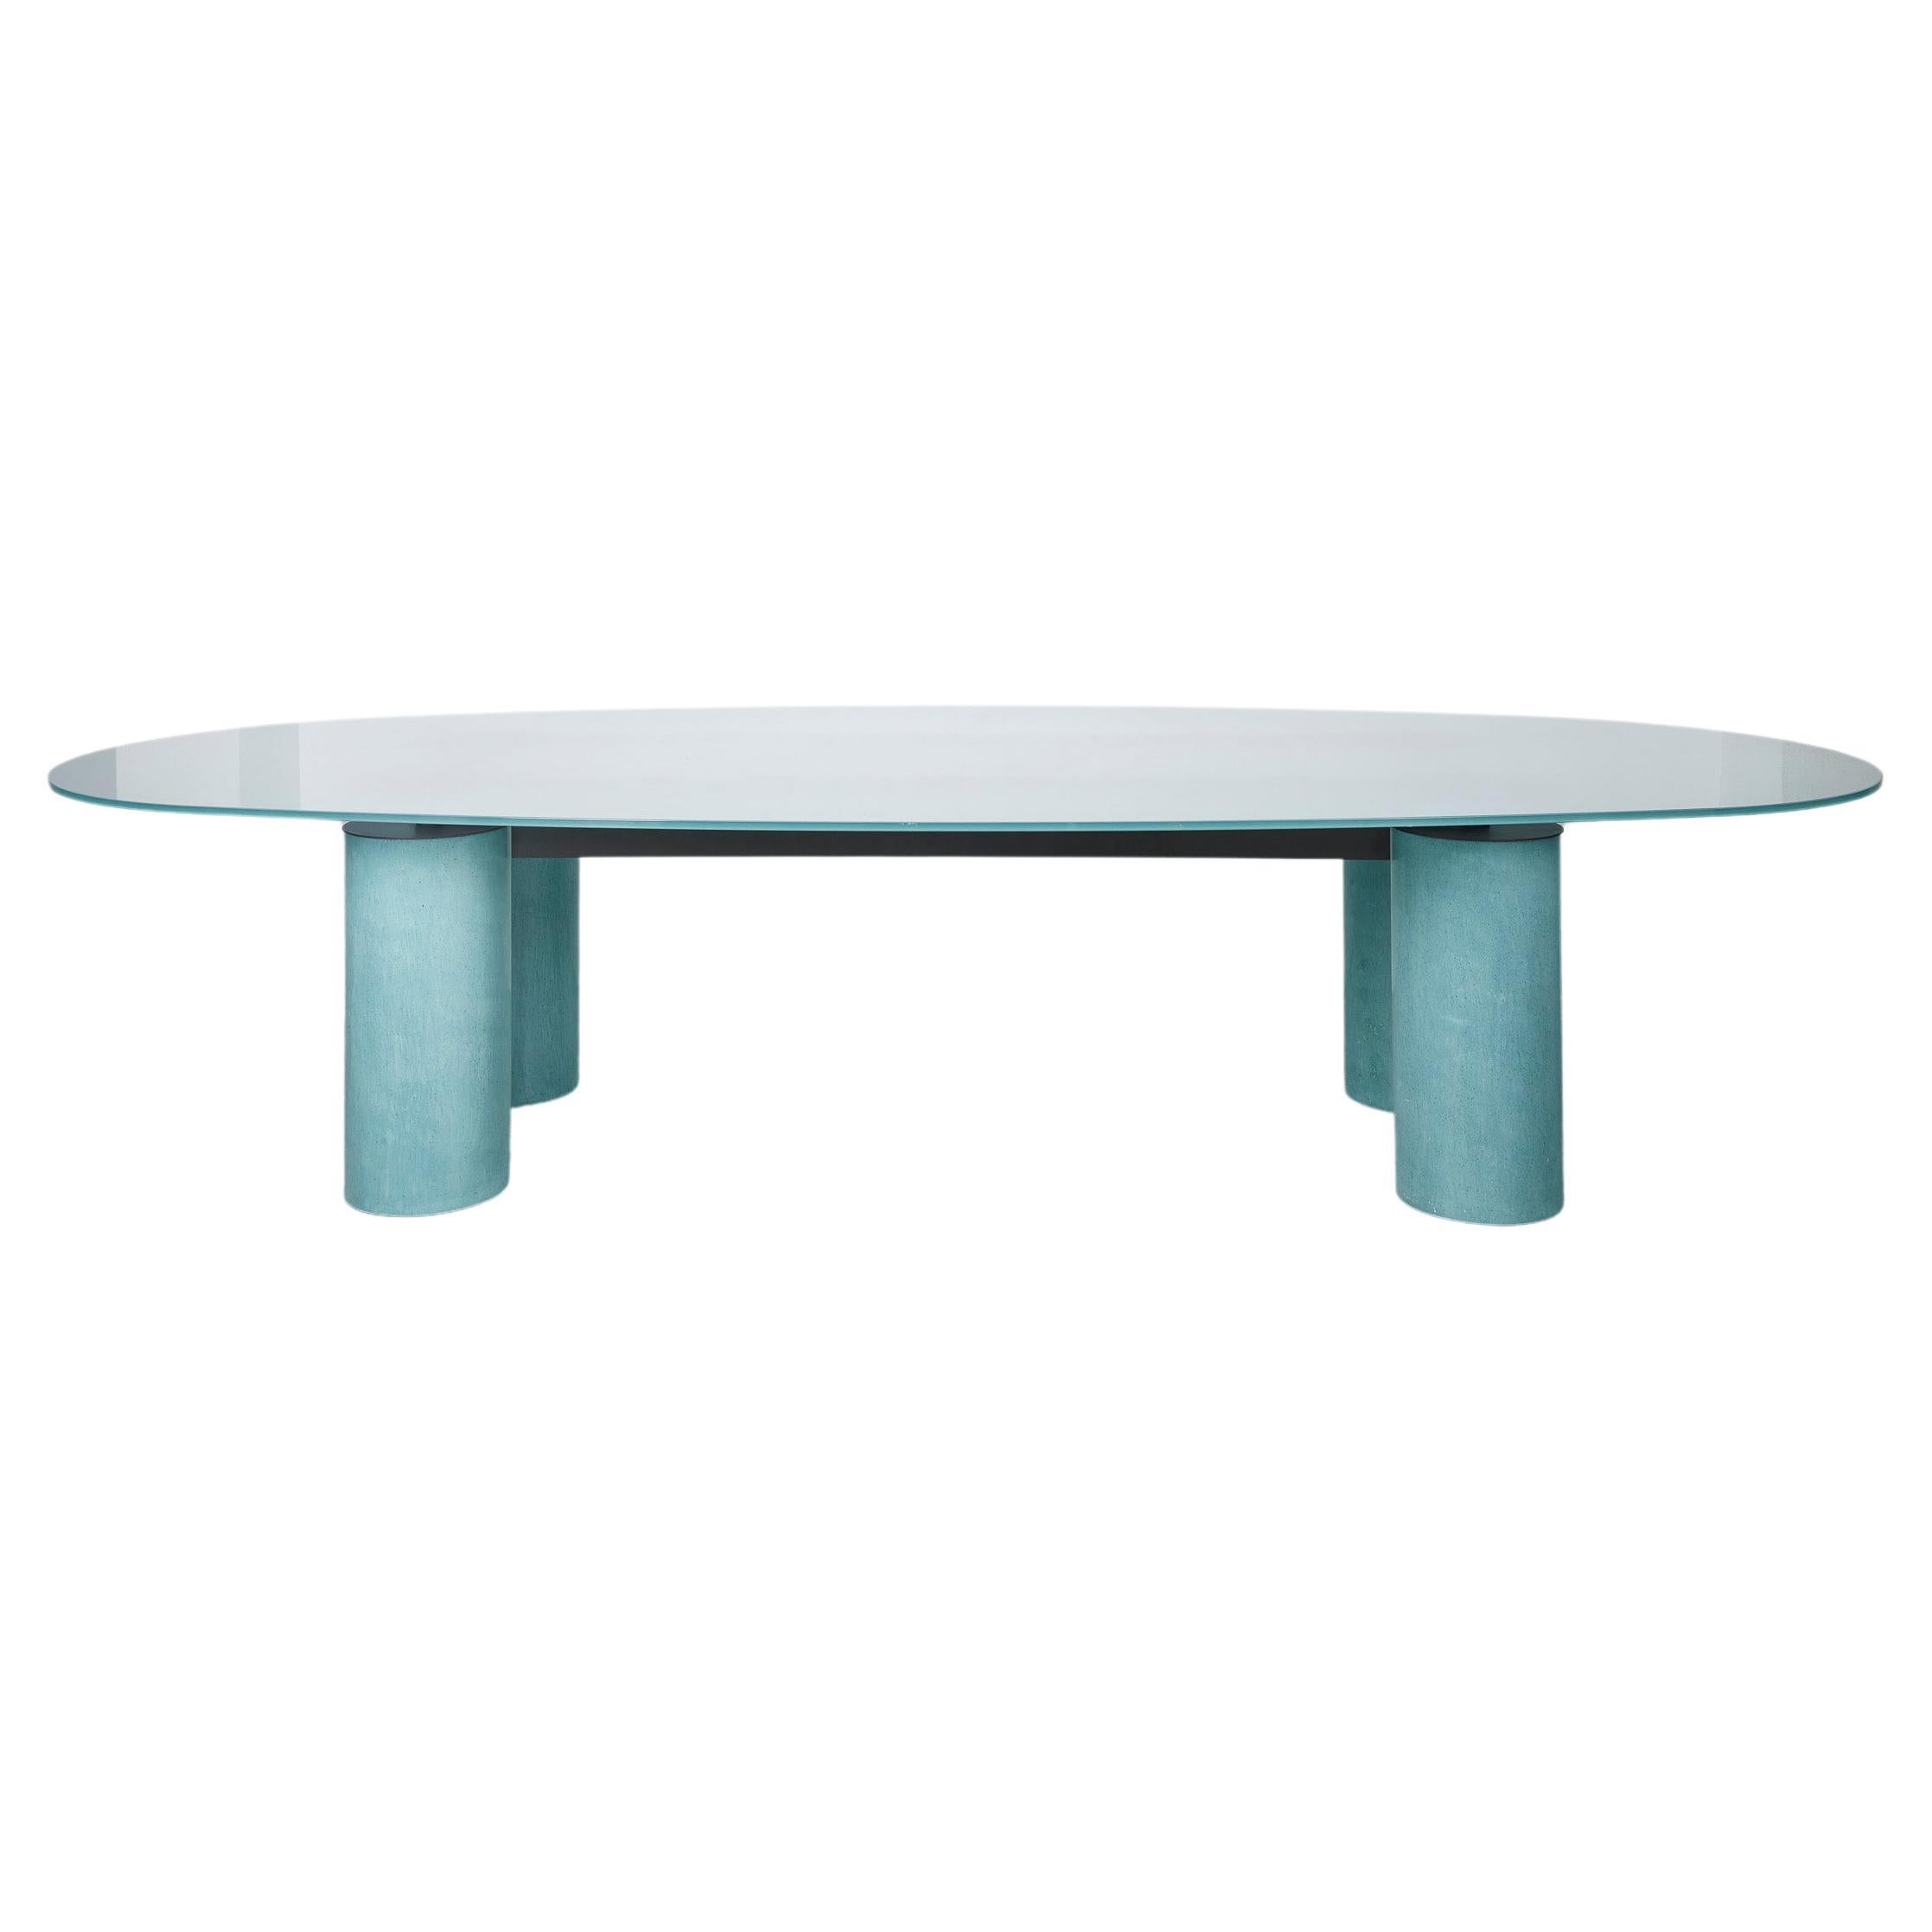 Large dining table Lella and Massimo Vignelli For Sale